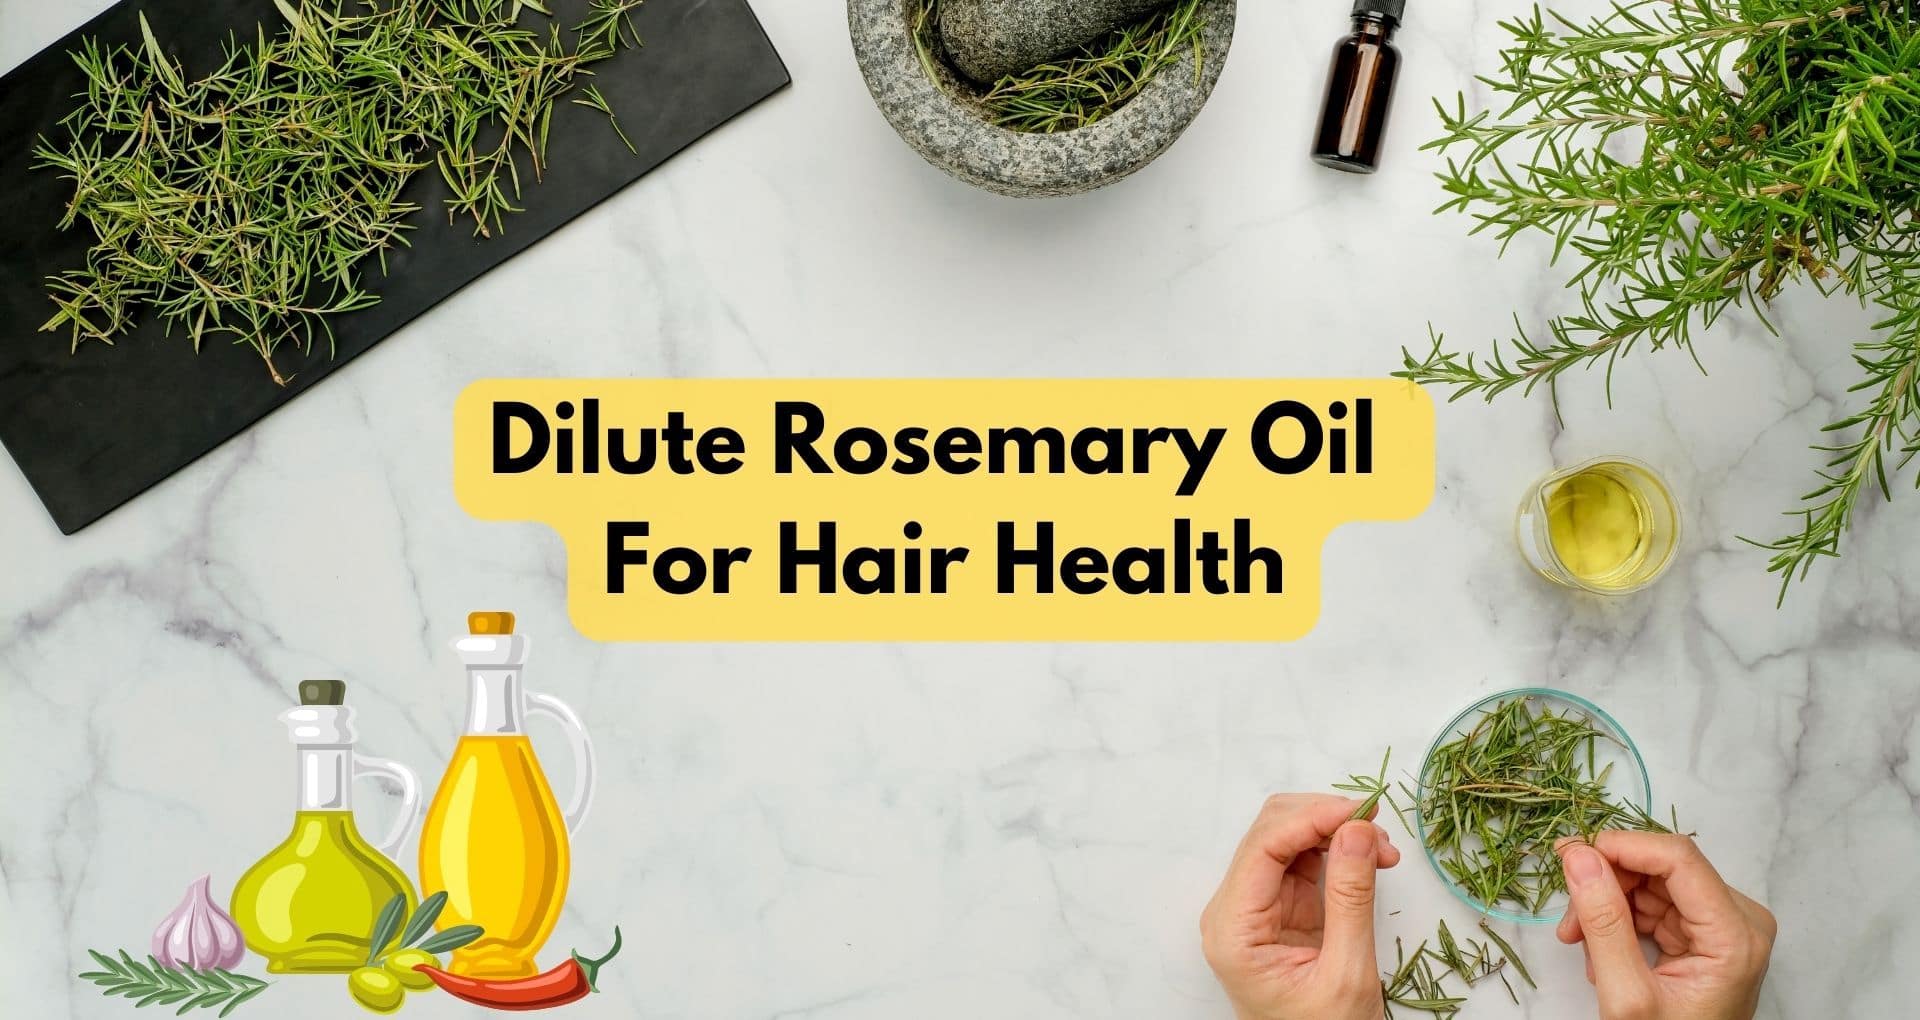 How To Dilute Rosemary Oil For Hair Health 0246